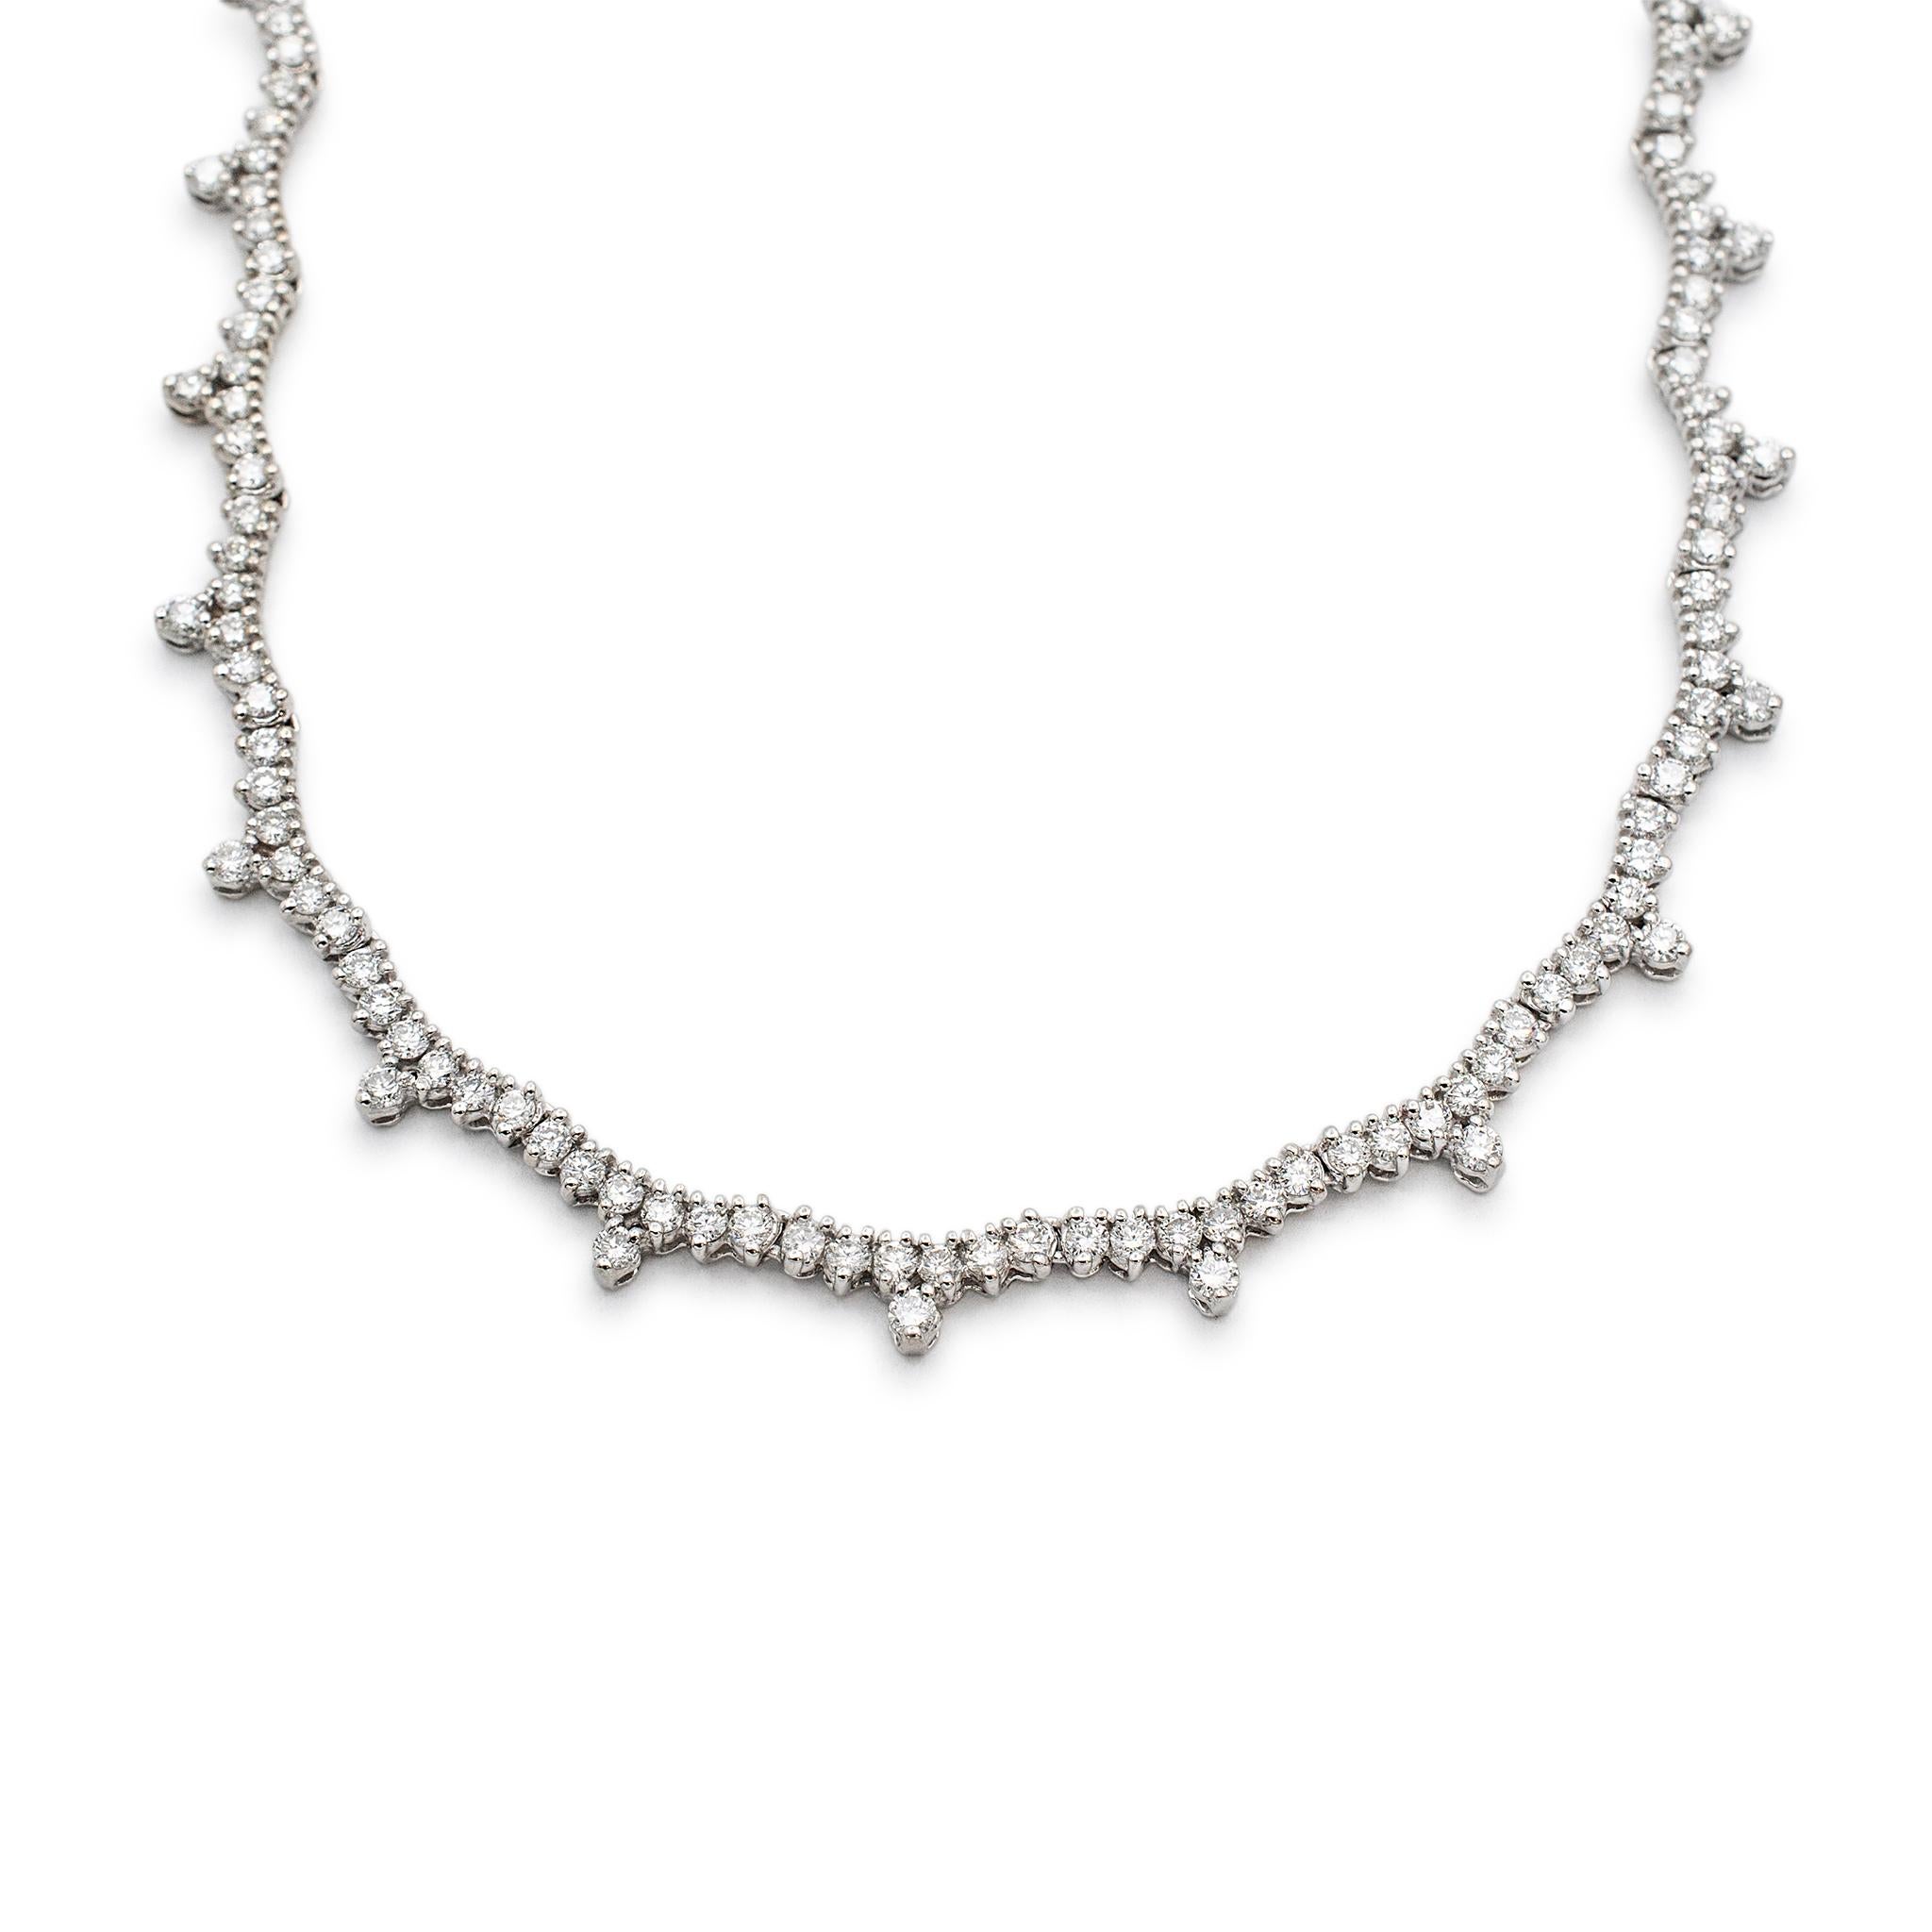 Gender: Ladies

Metal Type: 14K White Gold

Length: 16.00 inches

Width: 5.50 mm

Weight: 24.80 grams

14K white gold single strand collar diamond necklace. The metal was tested and determined to be 14K white gold.

Pre-owned in excellent condition.